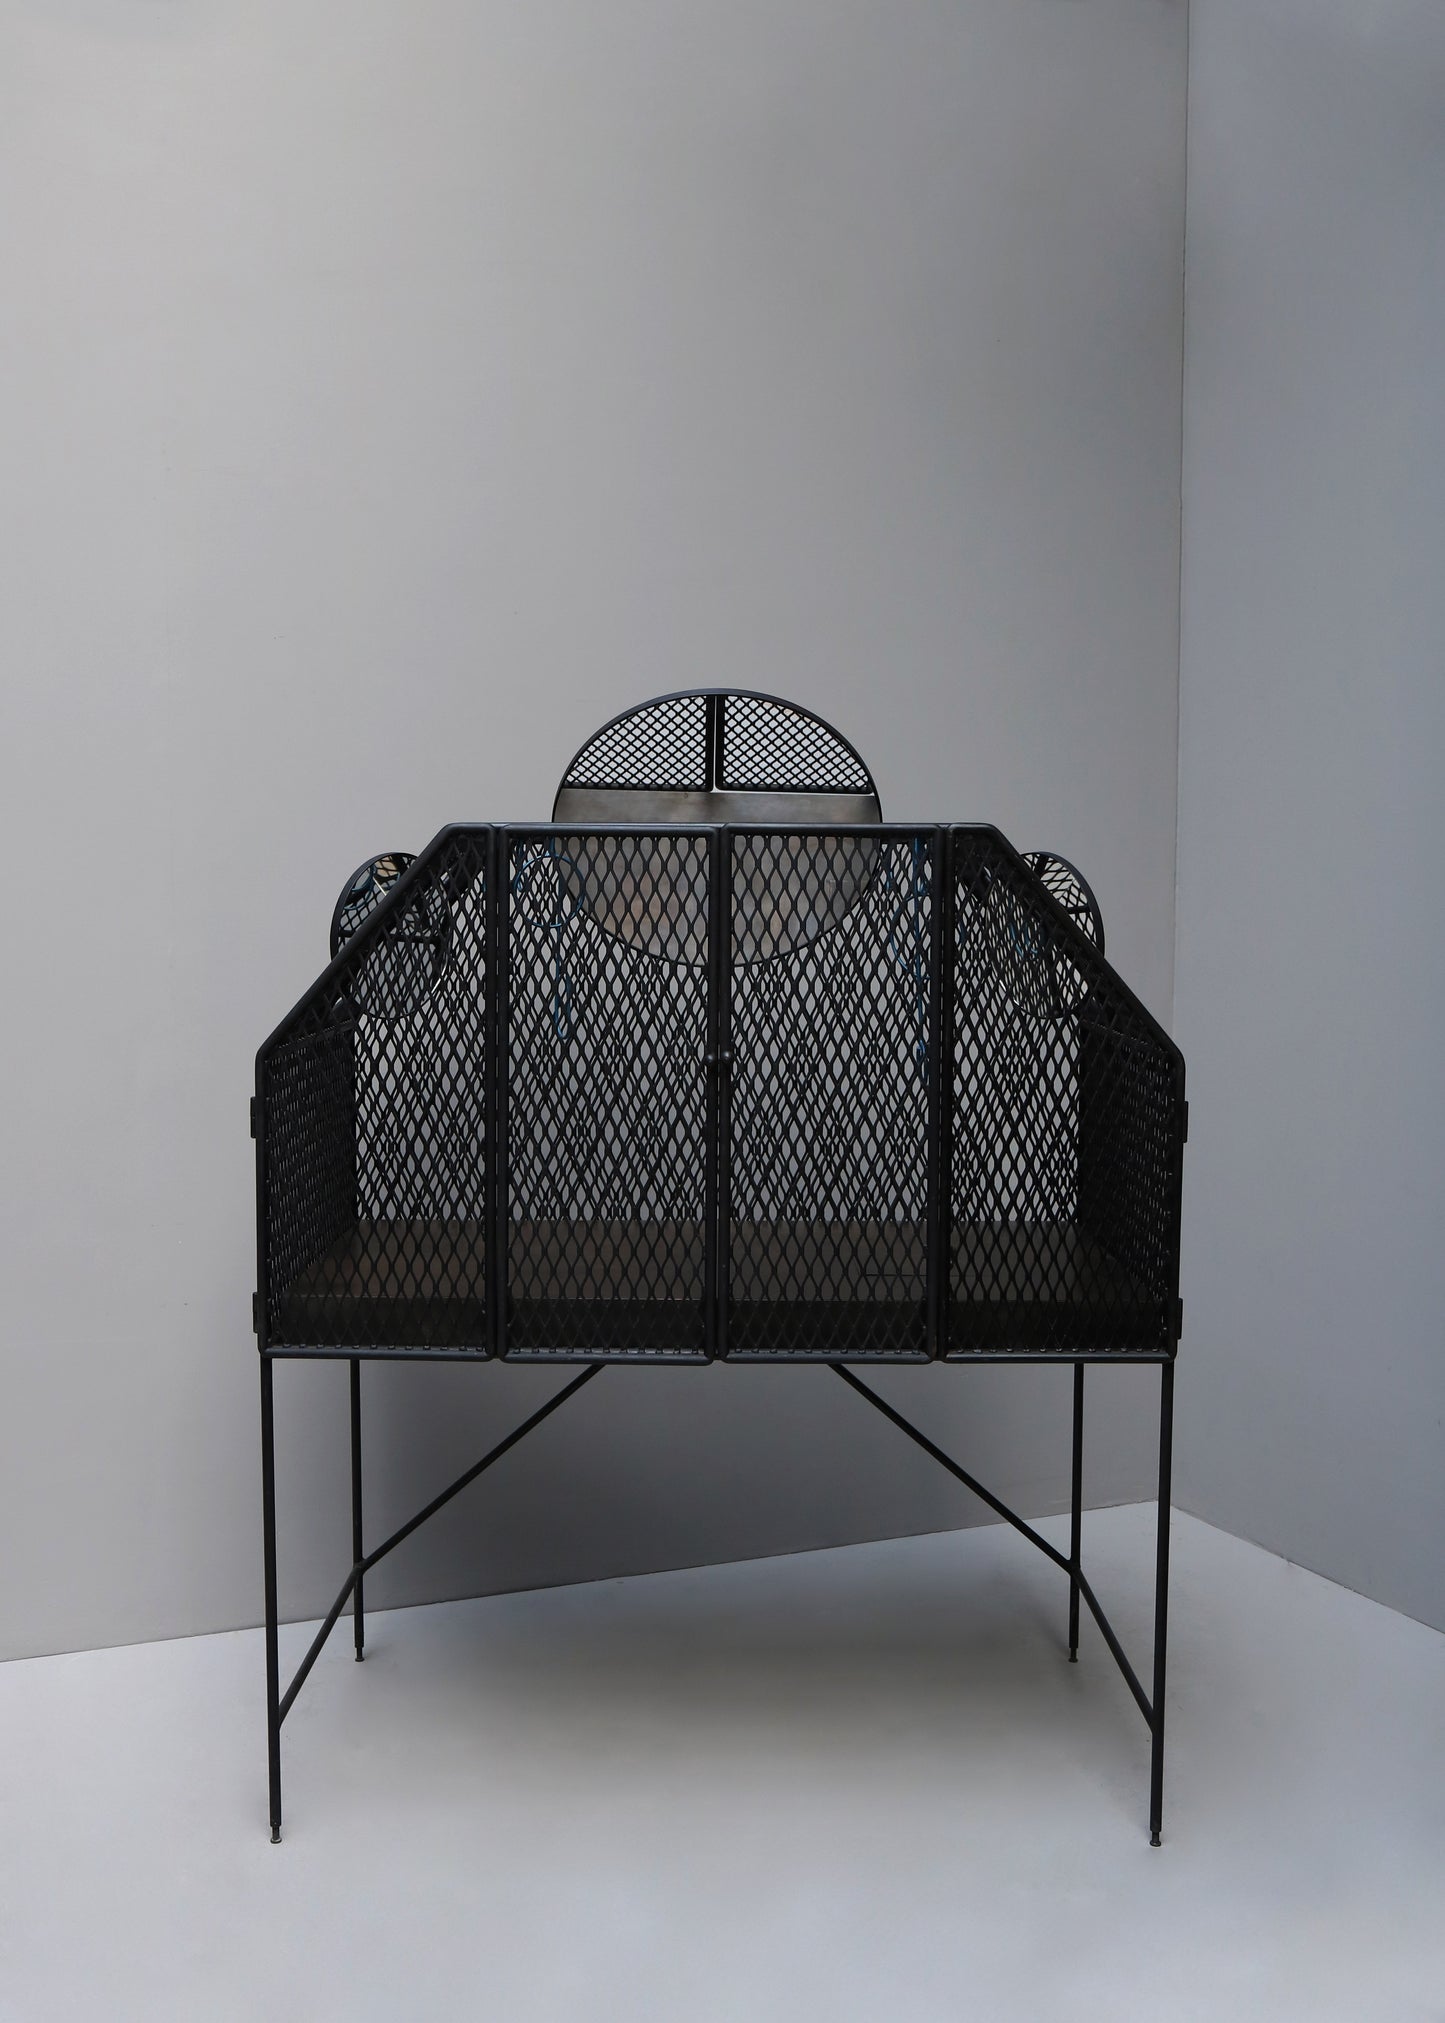 "CAGE FOR BIRDS" BY FAYE TOOGOOD